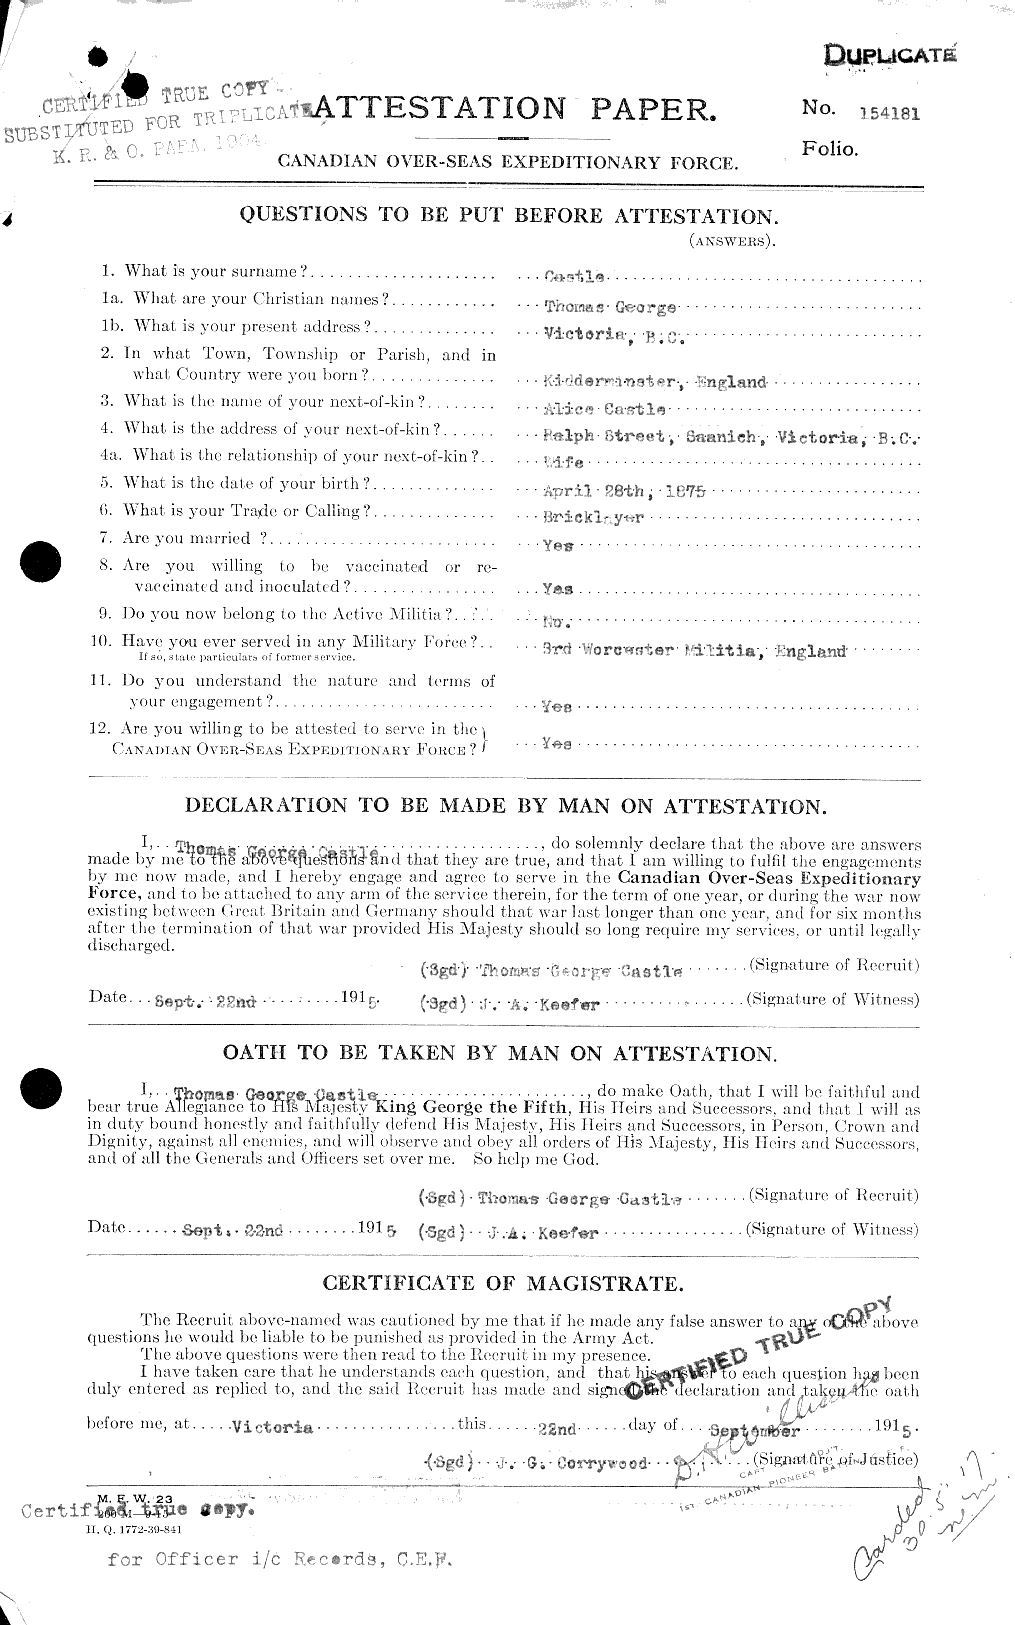 Personnel Records of the First World War - CEF 013105a